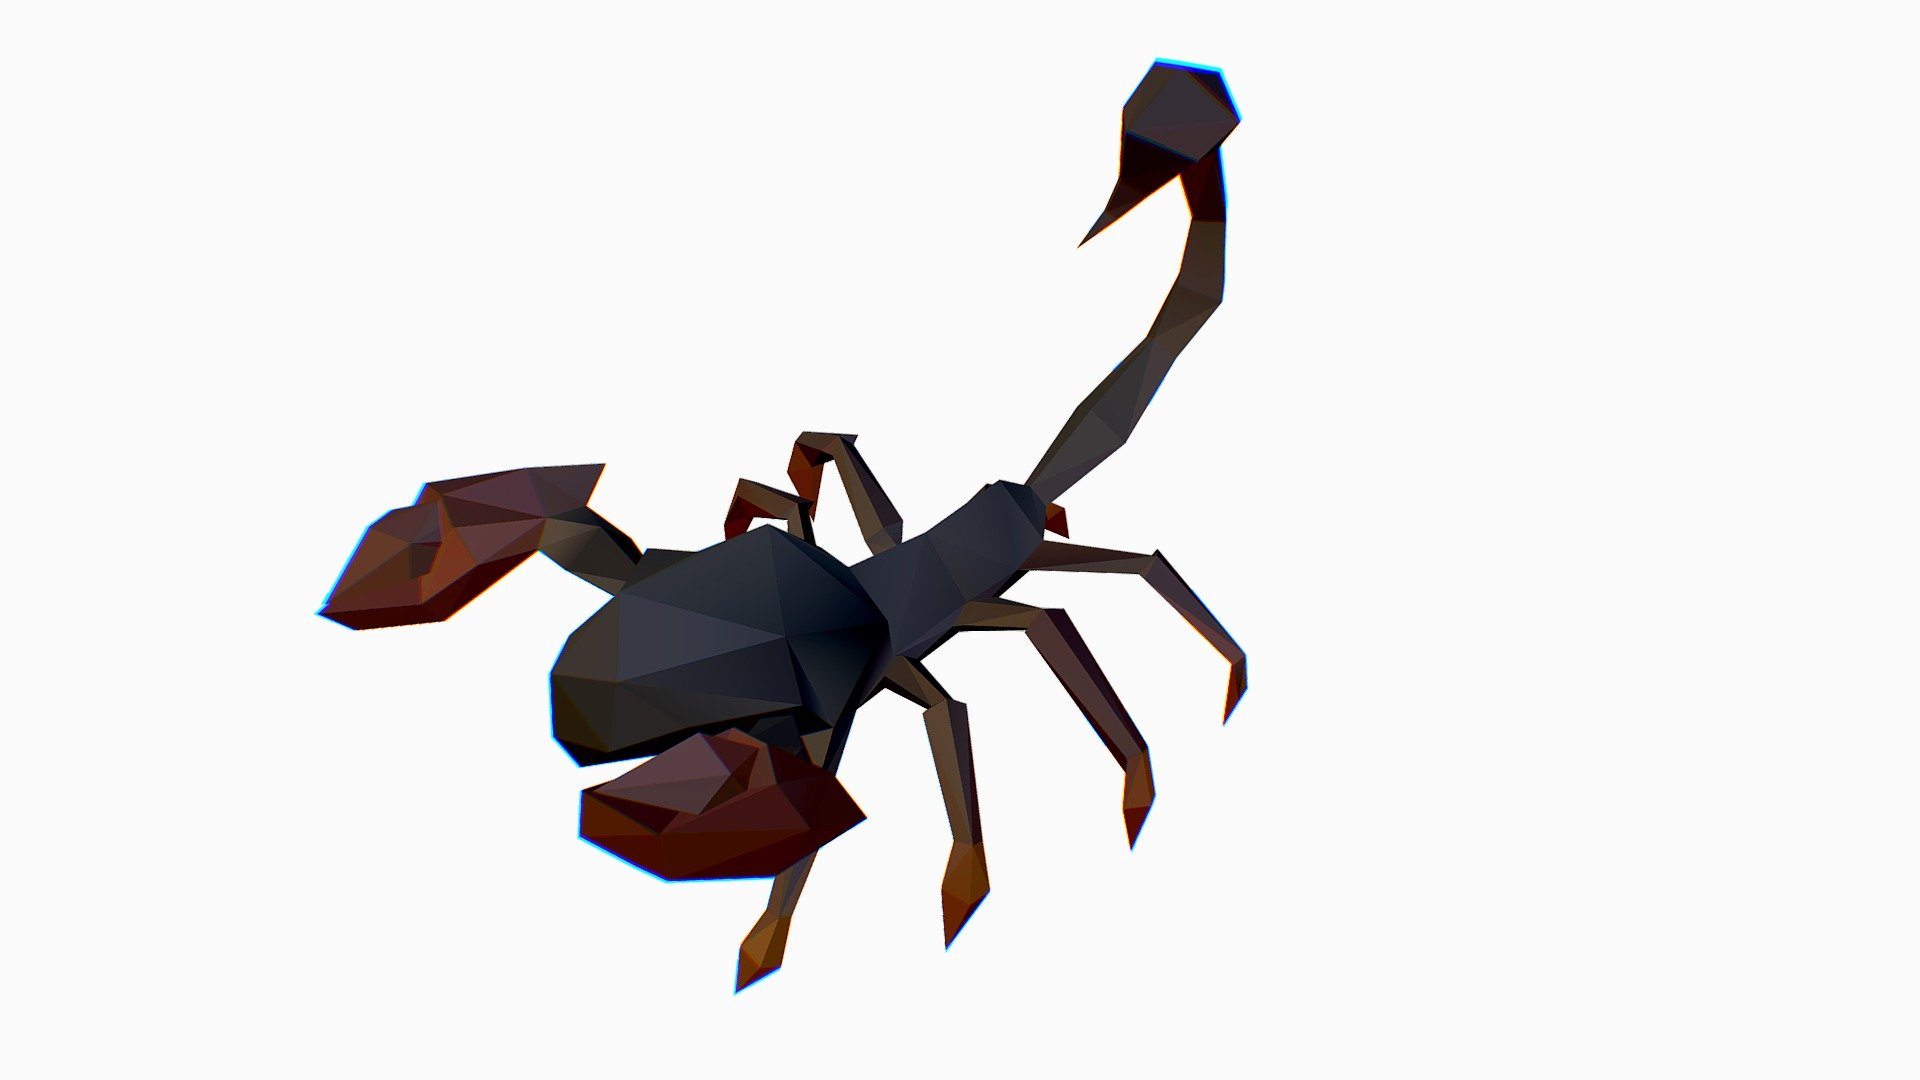 Animated Scorpion Lowpoly Art Style

Animation layers:
Attack _0   -0-38
Attack_1 - 38-85
Attack_2 -85-123
Combatreidines -123-163
Copit_0   163-191
Copit_1191-224
Run 225-248
Walk 249-284
Death 284-369
Fallow  370-515
Idle   515-624 - Animated Scorpion Lowpoly Art Style - Buy Royalty Free 3D model by Oleg Shuldiakov (@olegshuldiakov) 3d model